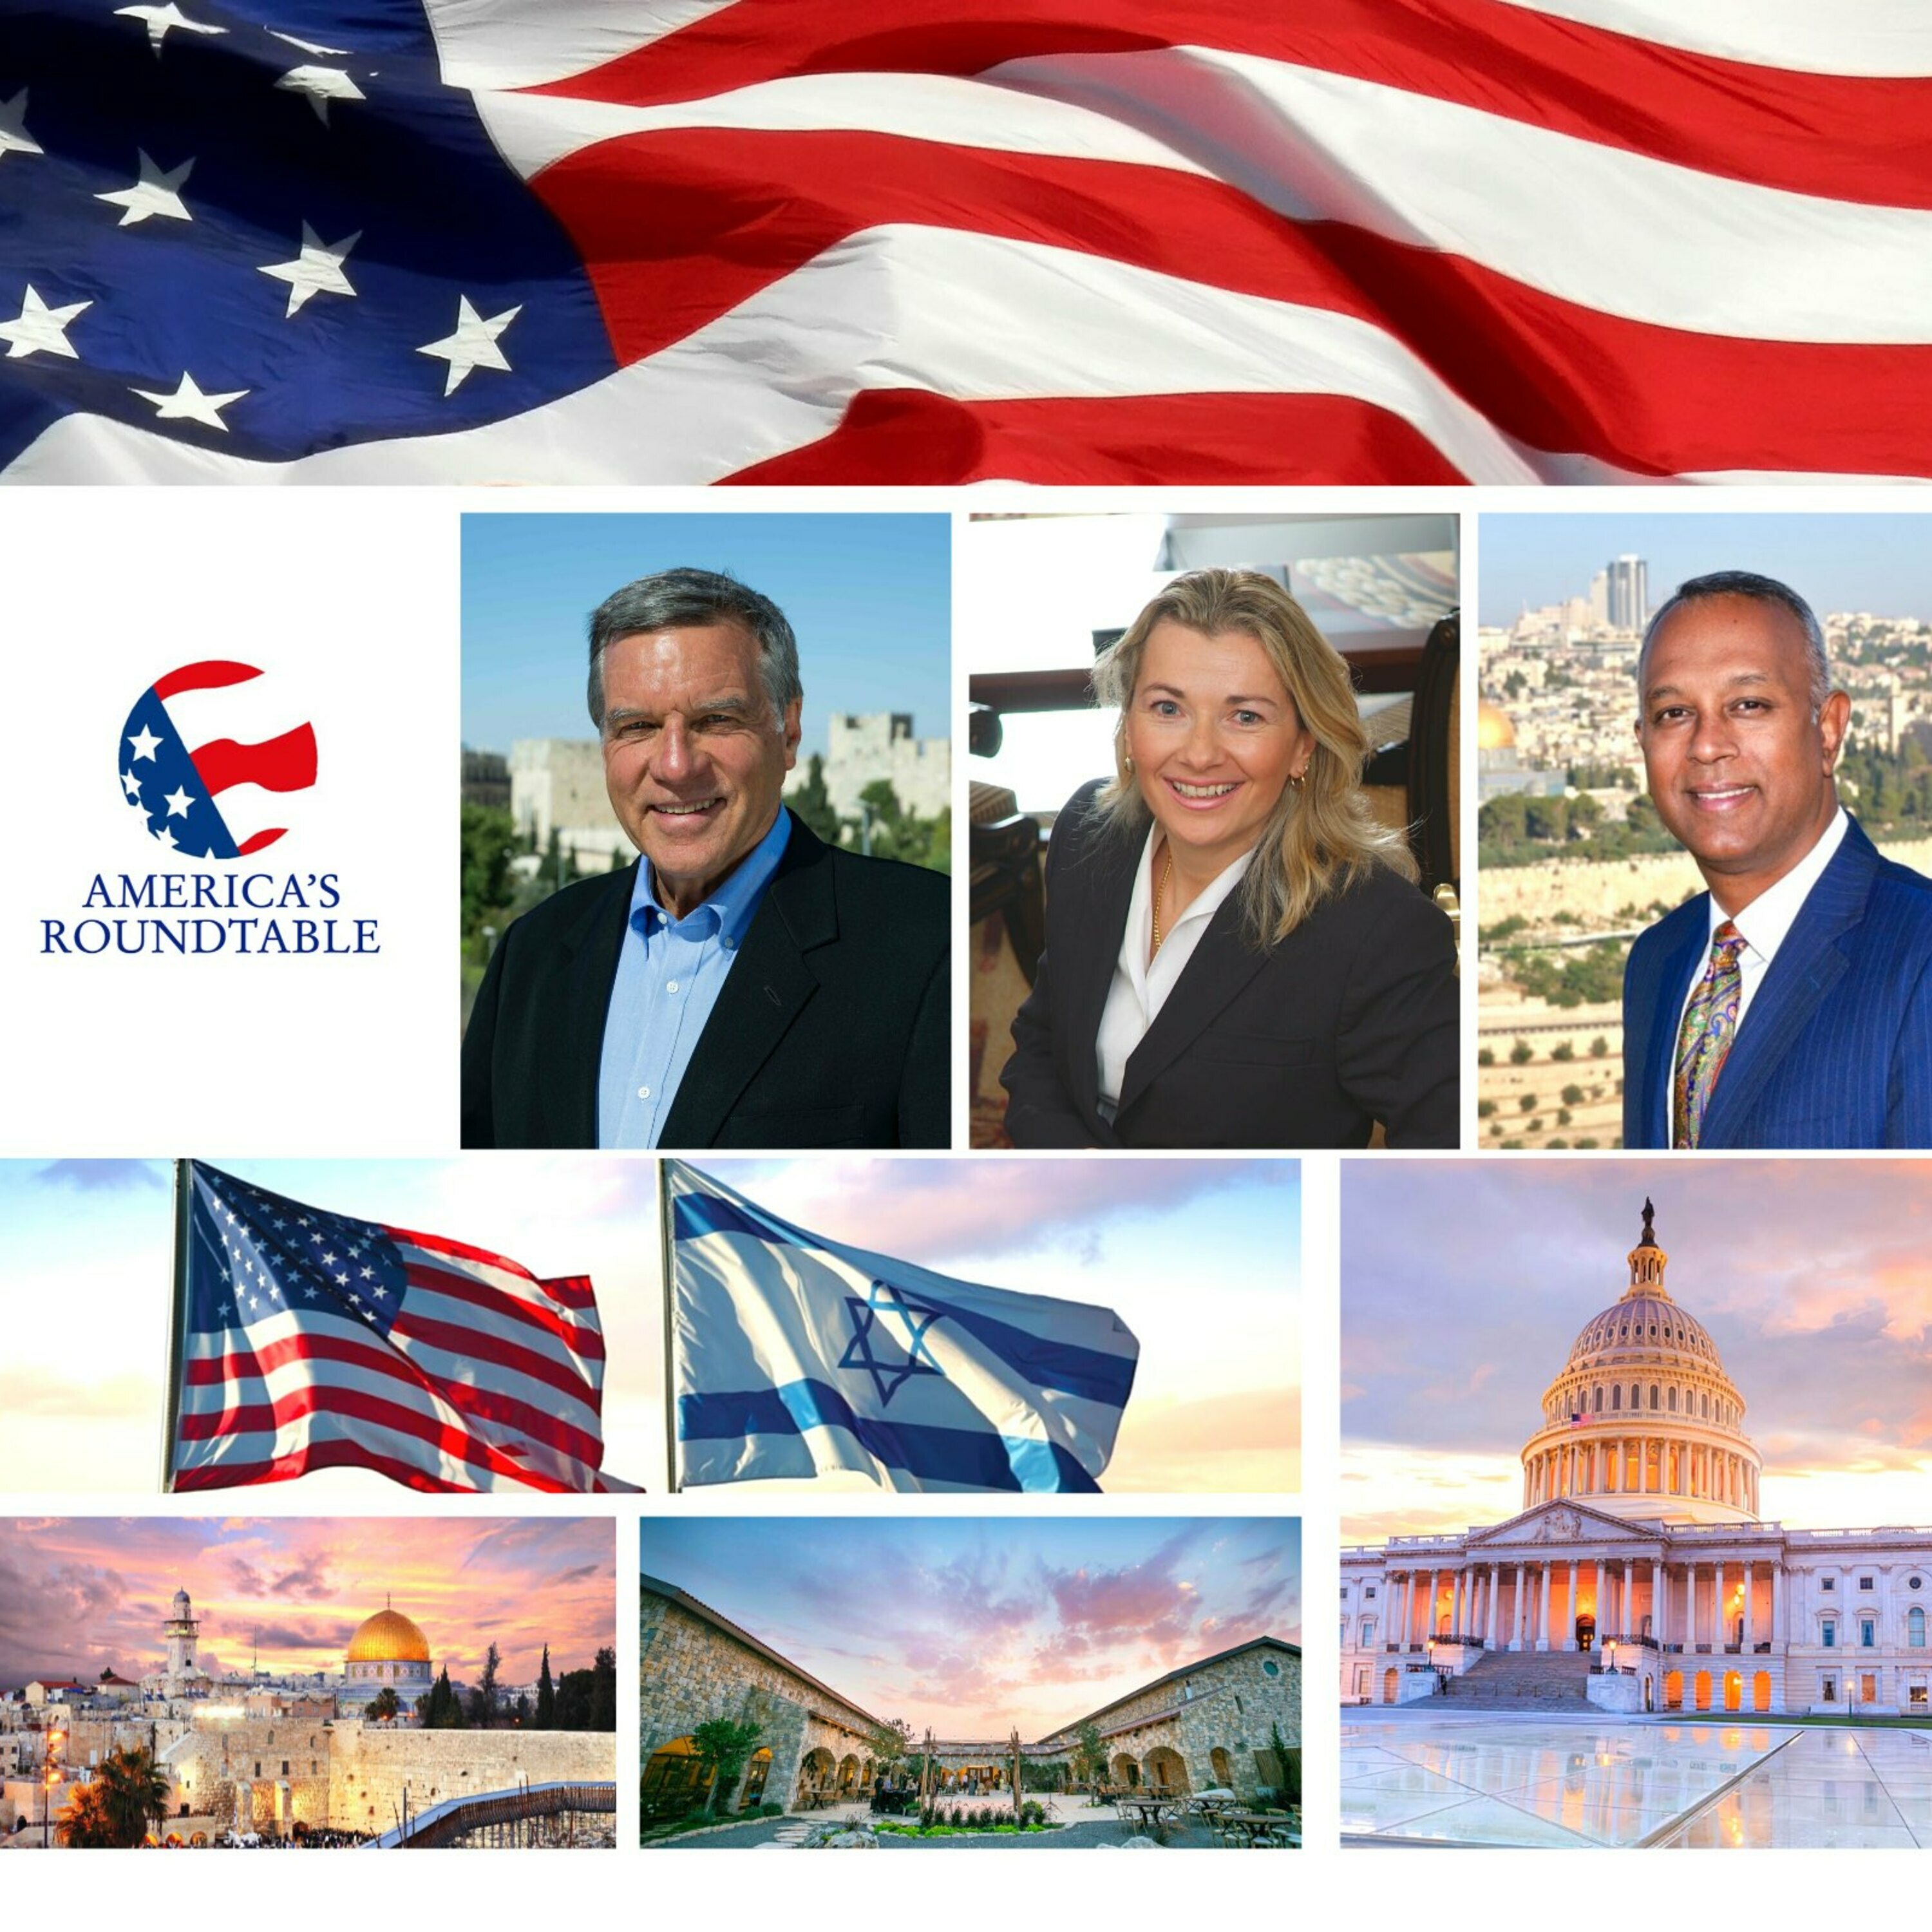 A Conversation with Chris Mitchell | Israel's 75th Anniversary | Focusing on American Leadership on the World Stage Over the Past Decade